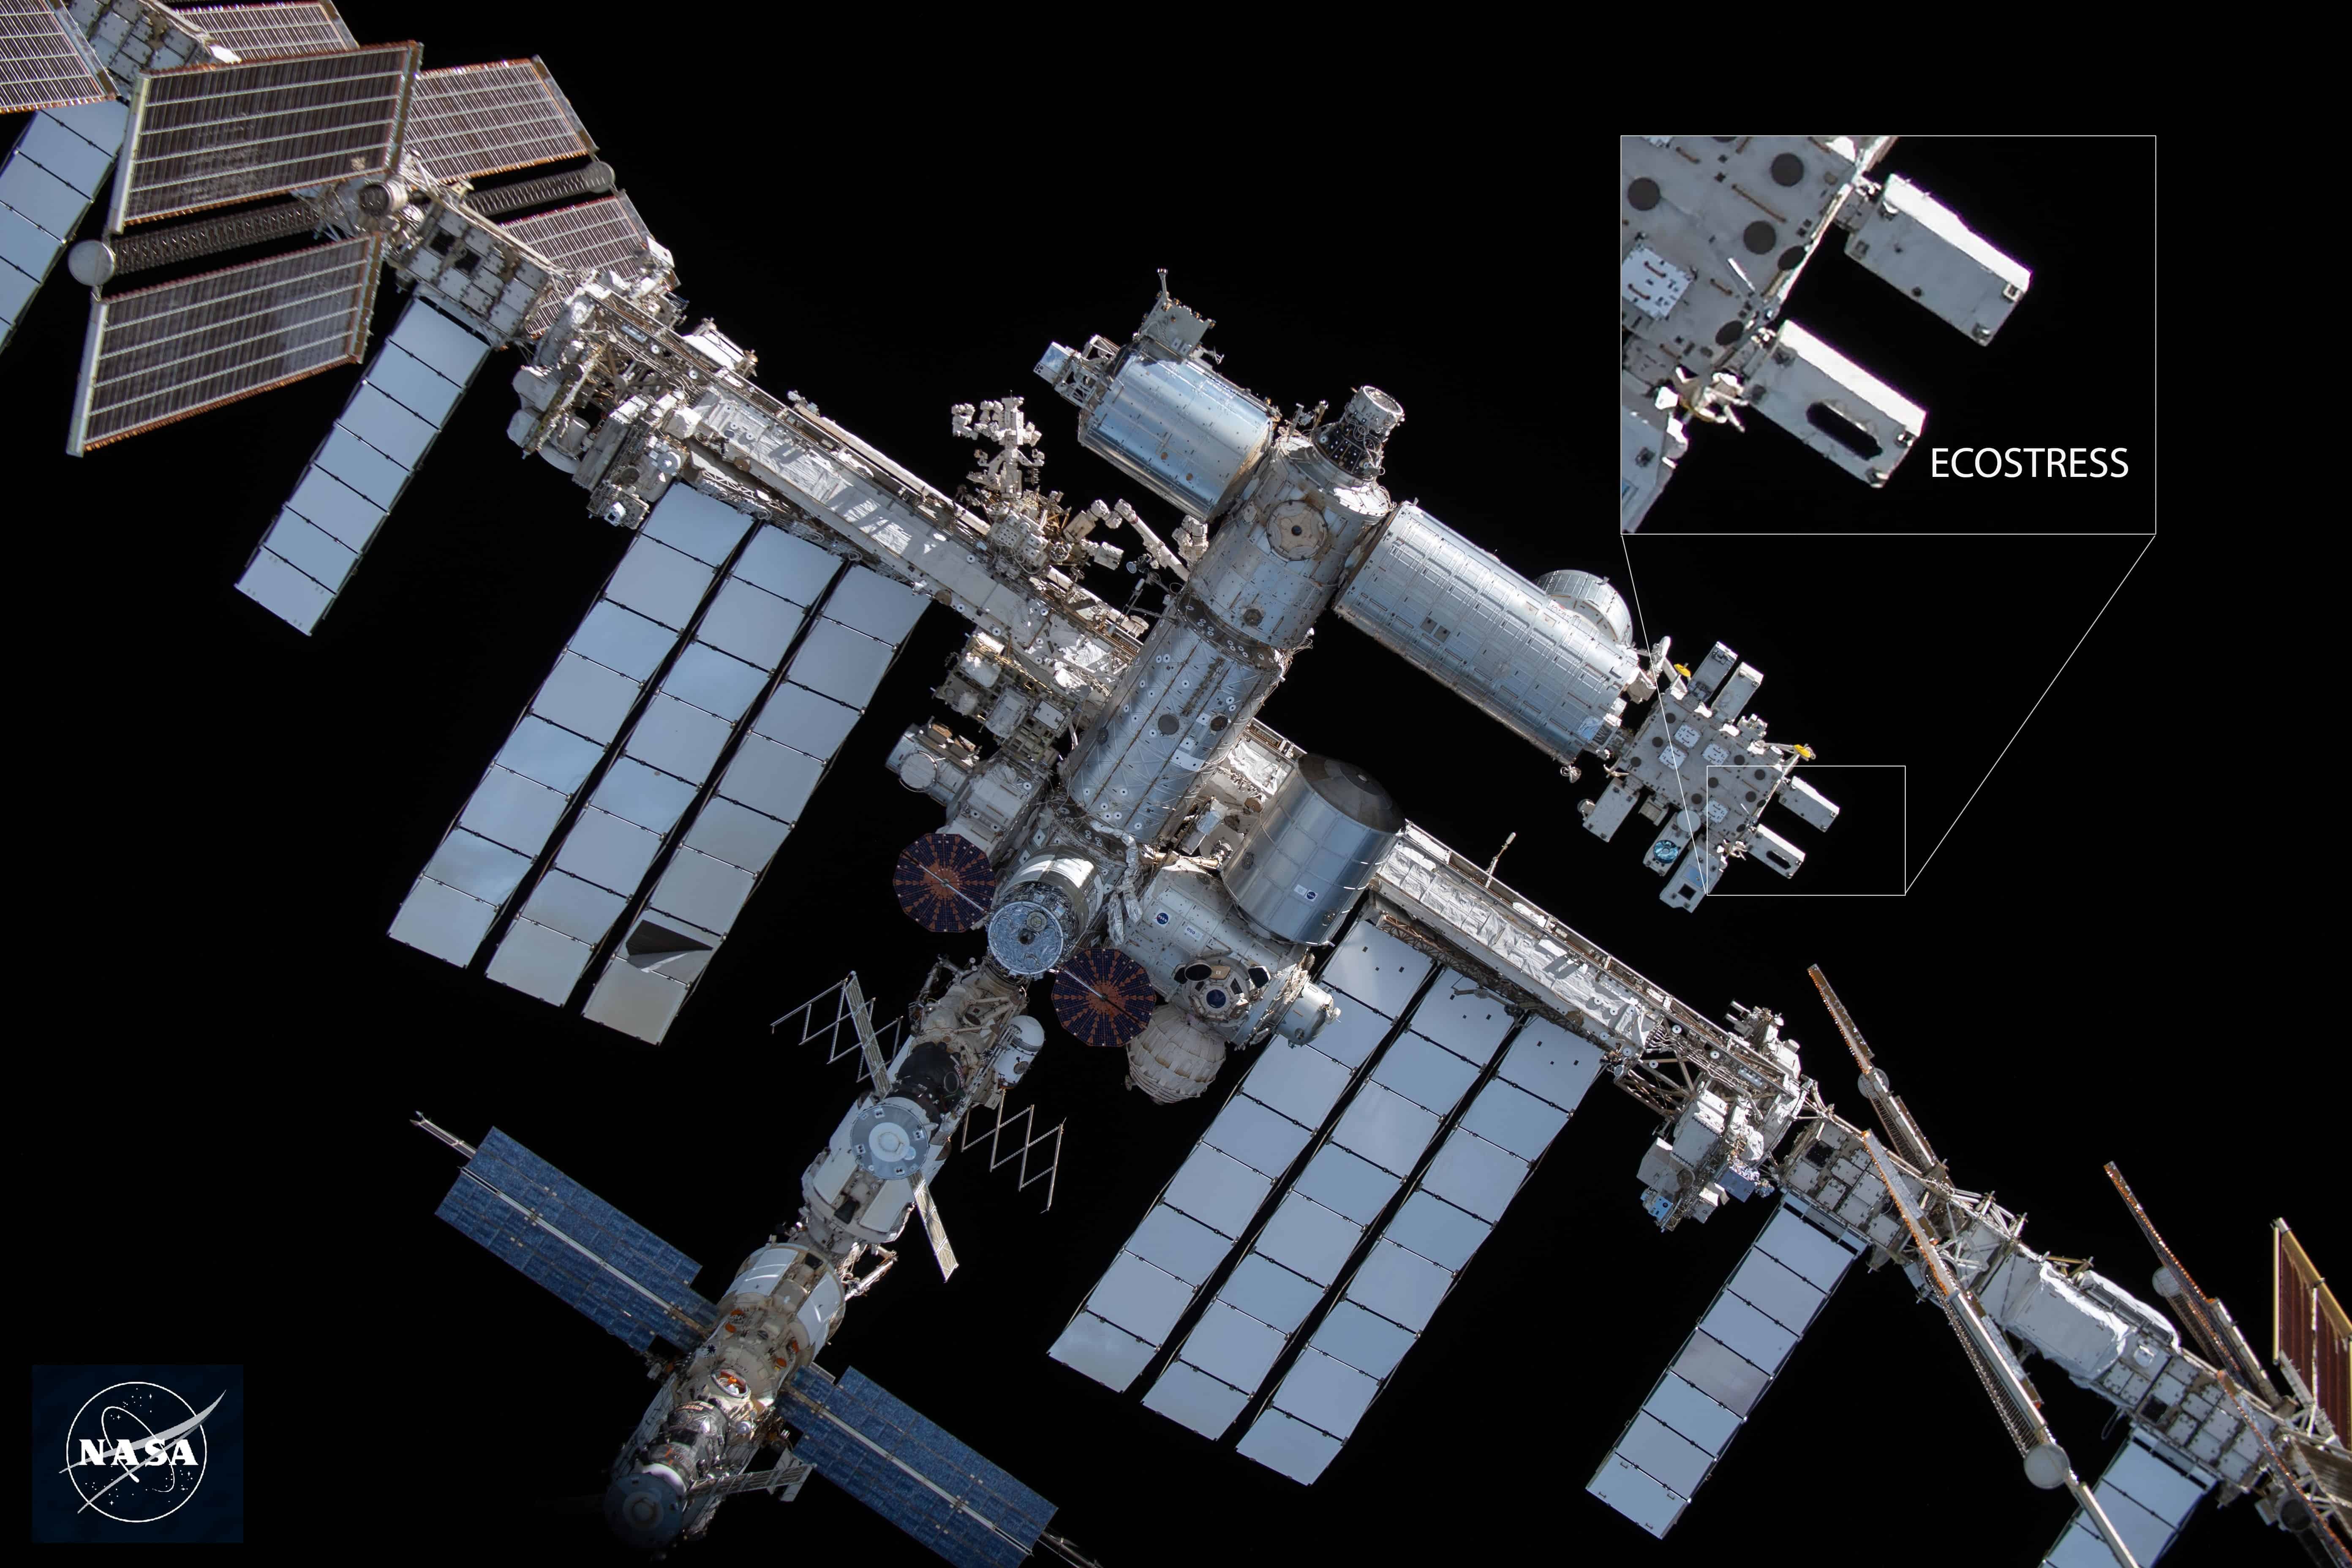 NASA's ECOSTRESS on the International Space Station Arial View with black space backgound